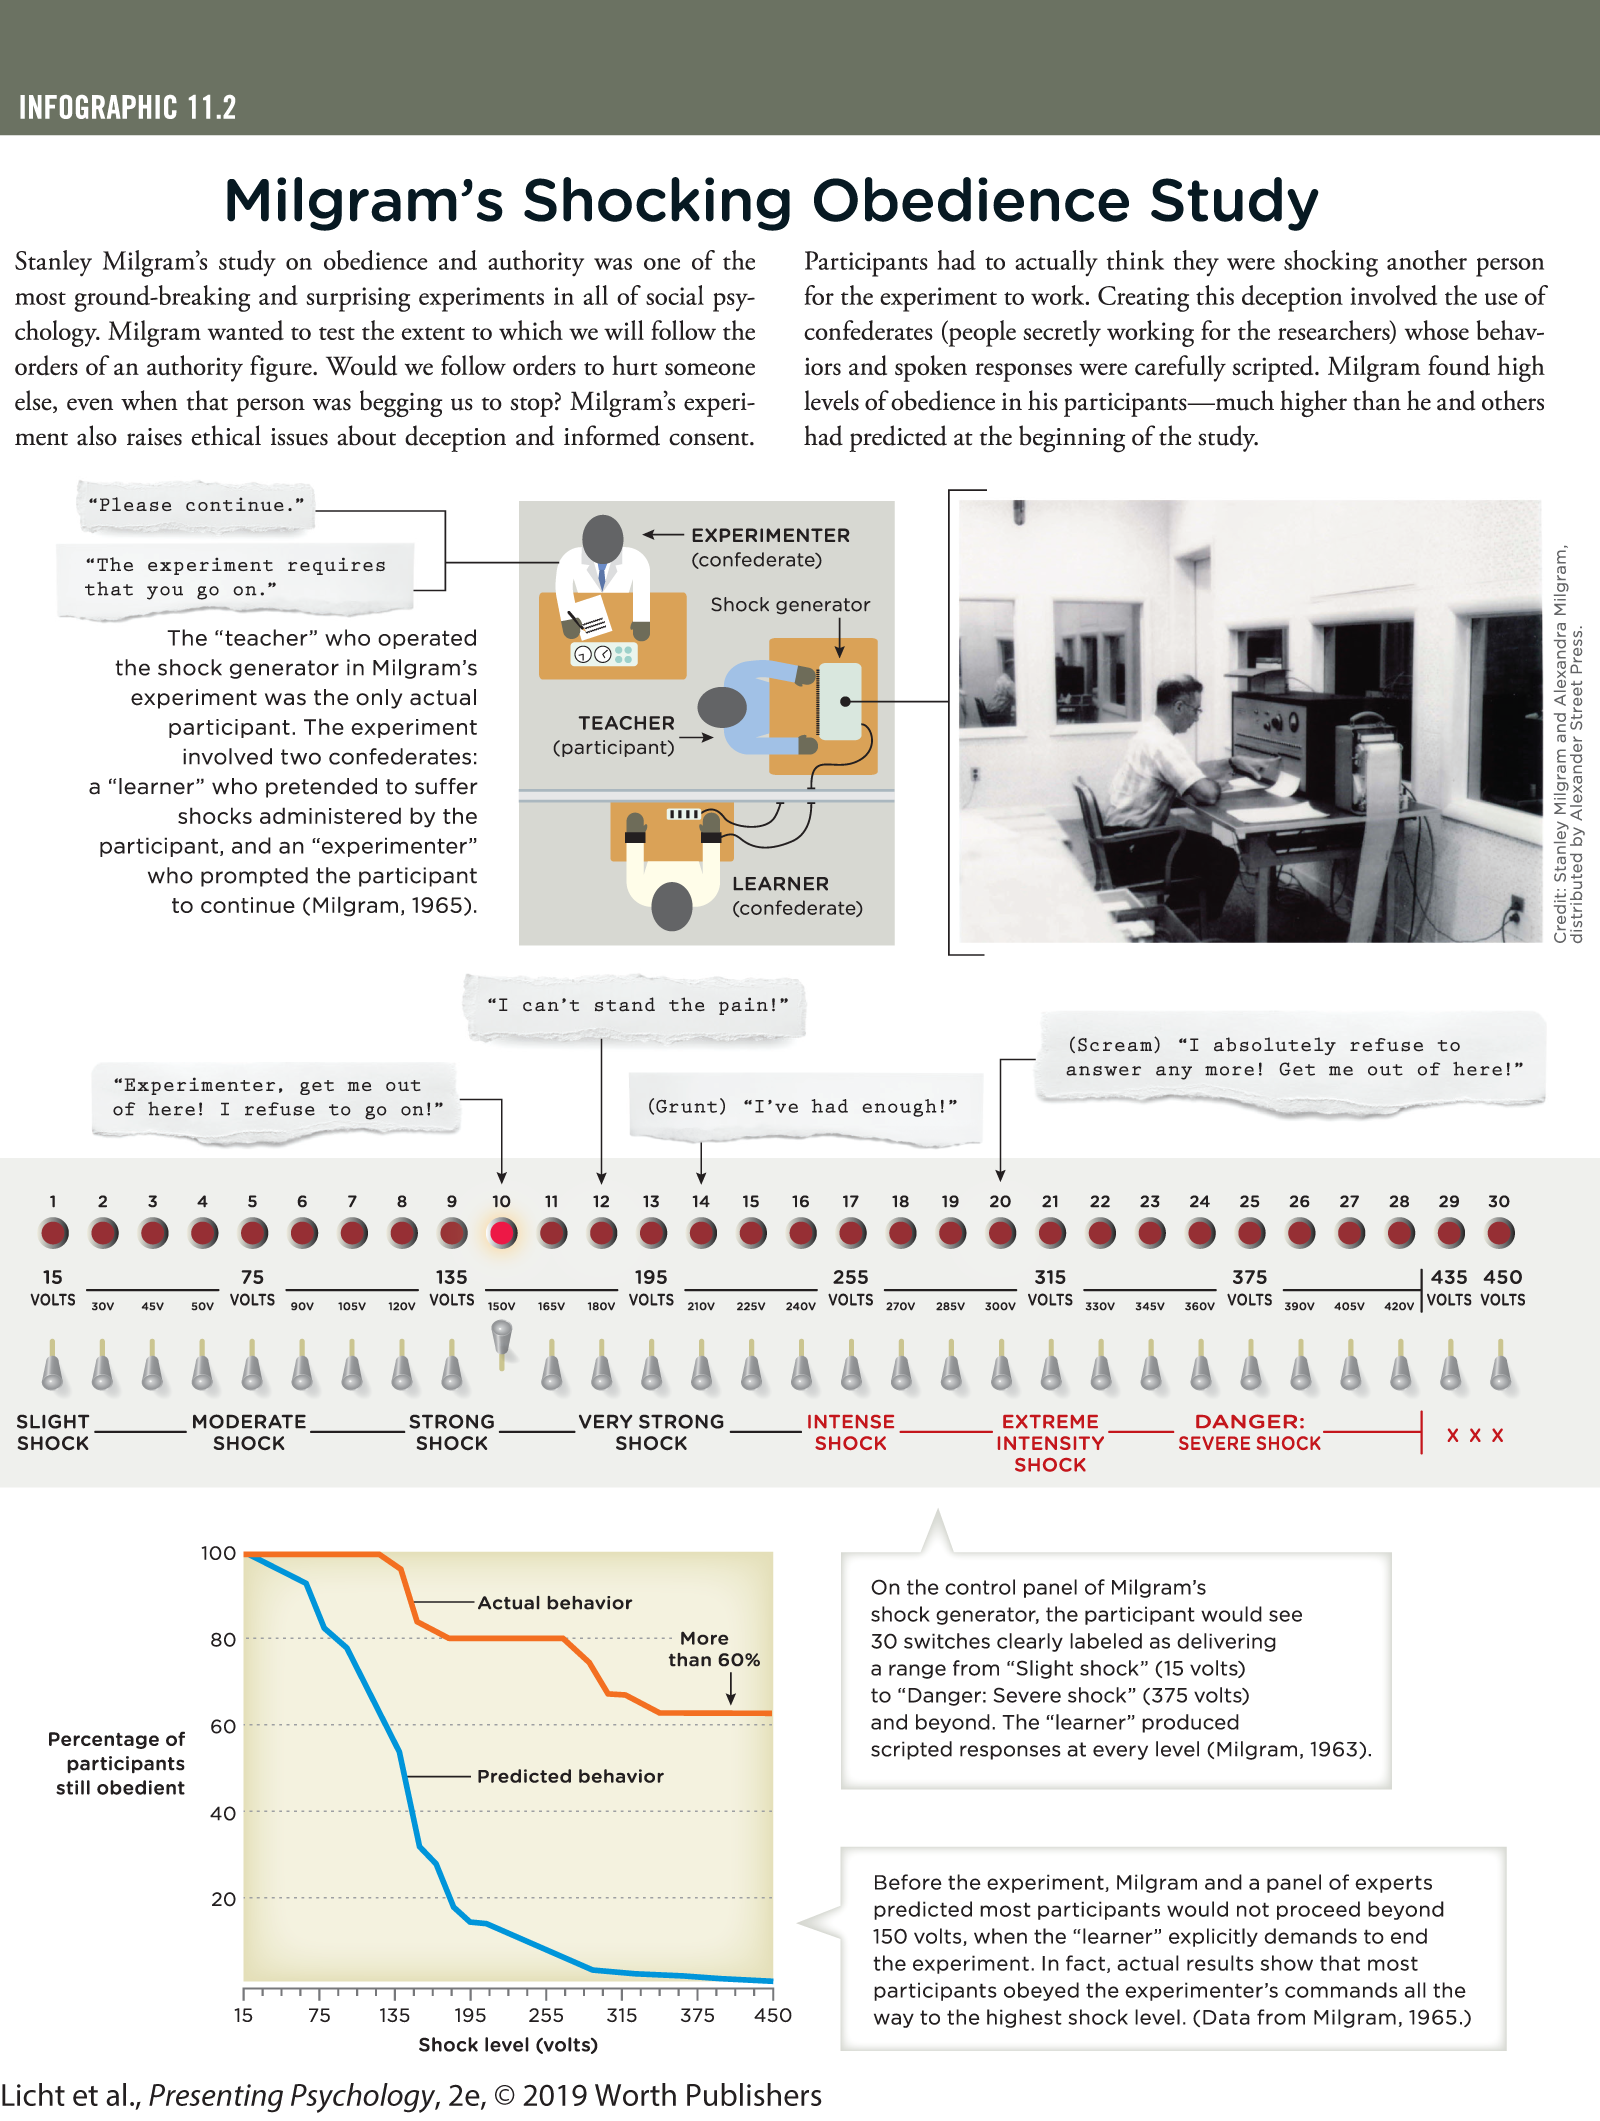 An illustration depicts Milgram’s Shocking Obedience Study. You can read full description from the link below